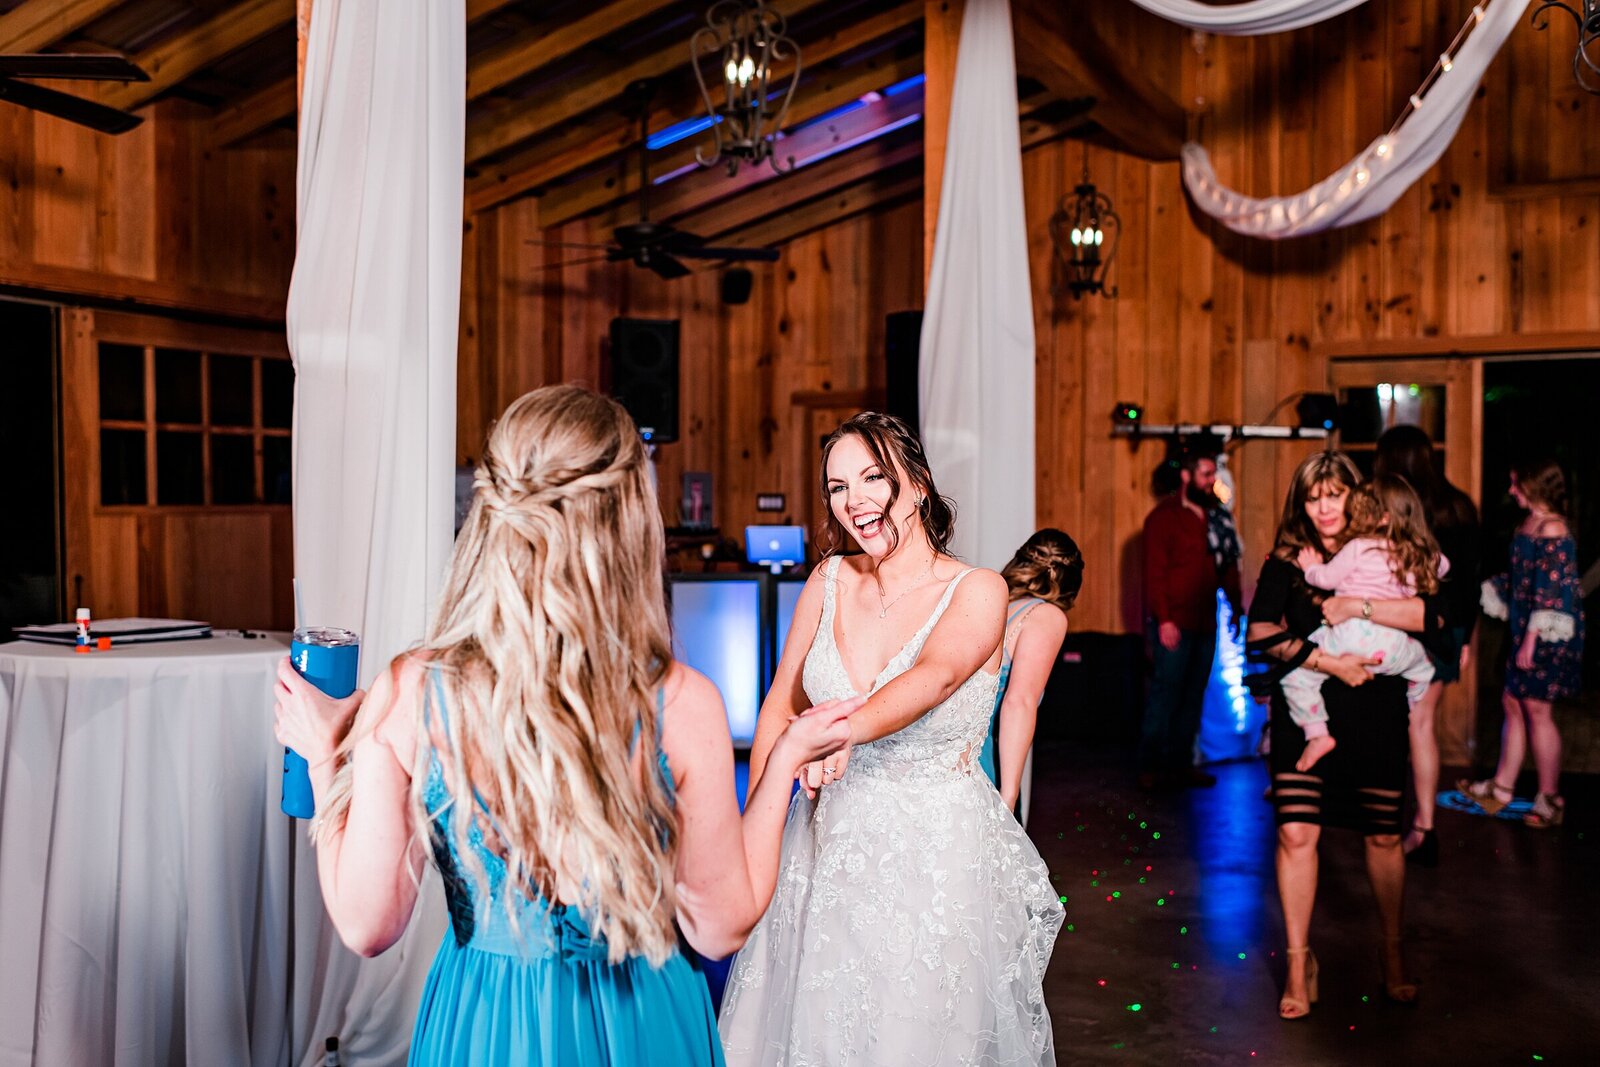 Dancing at Reception | The Delamater House Wedding | Chynna Pacheco Photography-1060